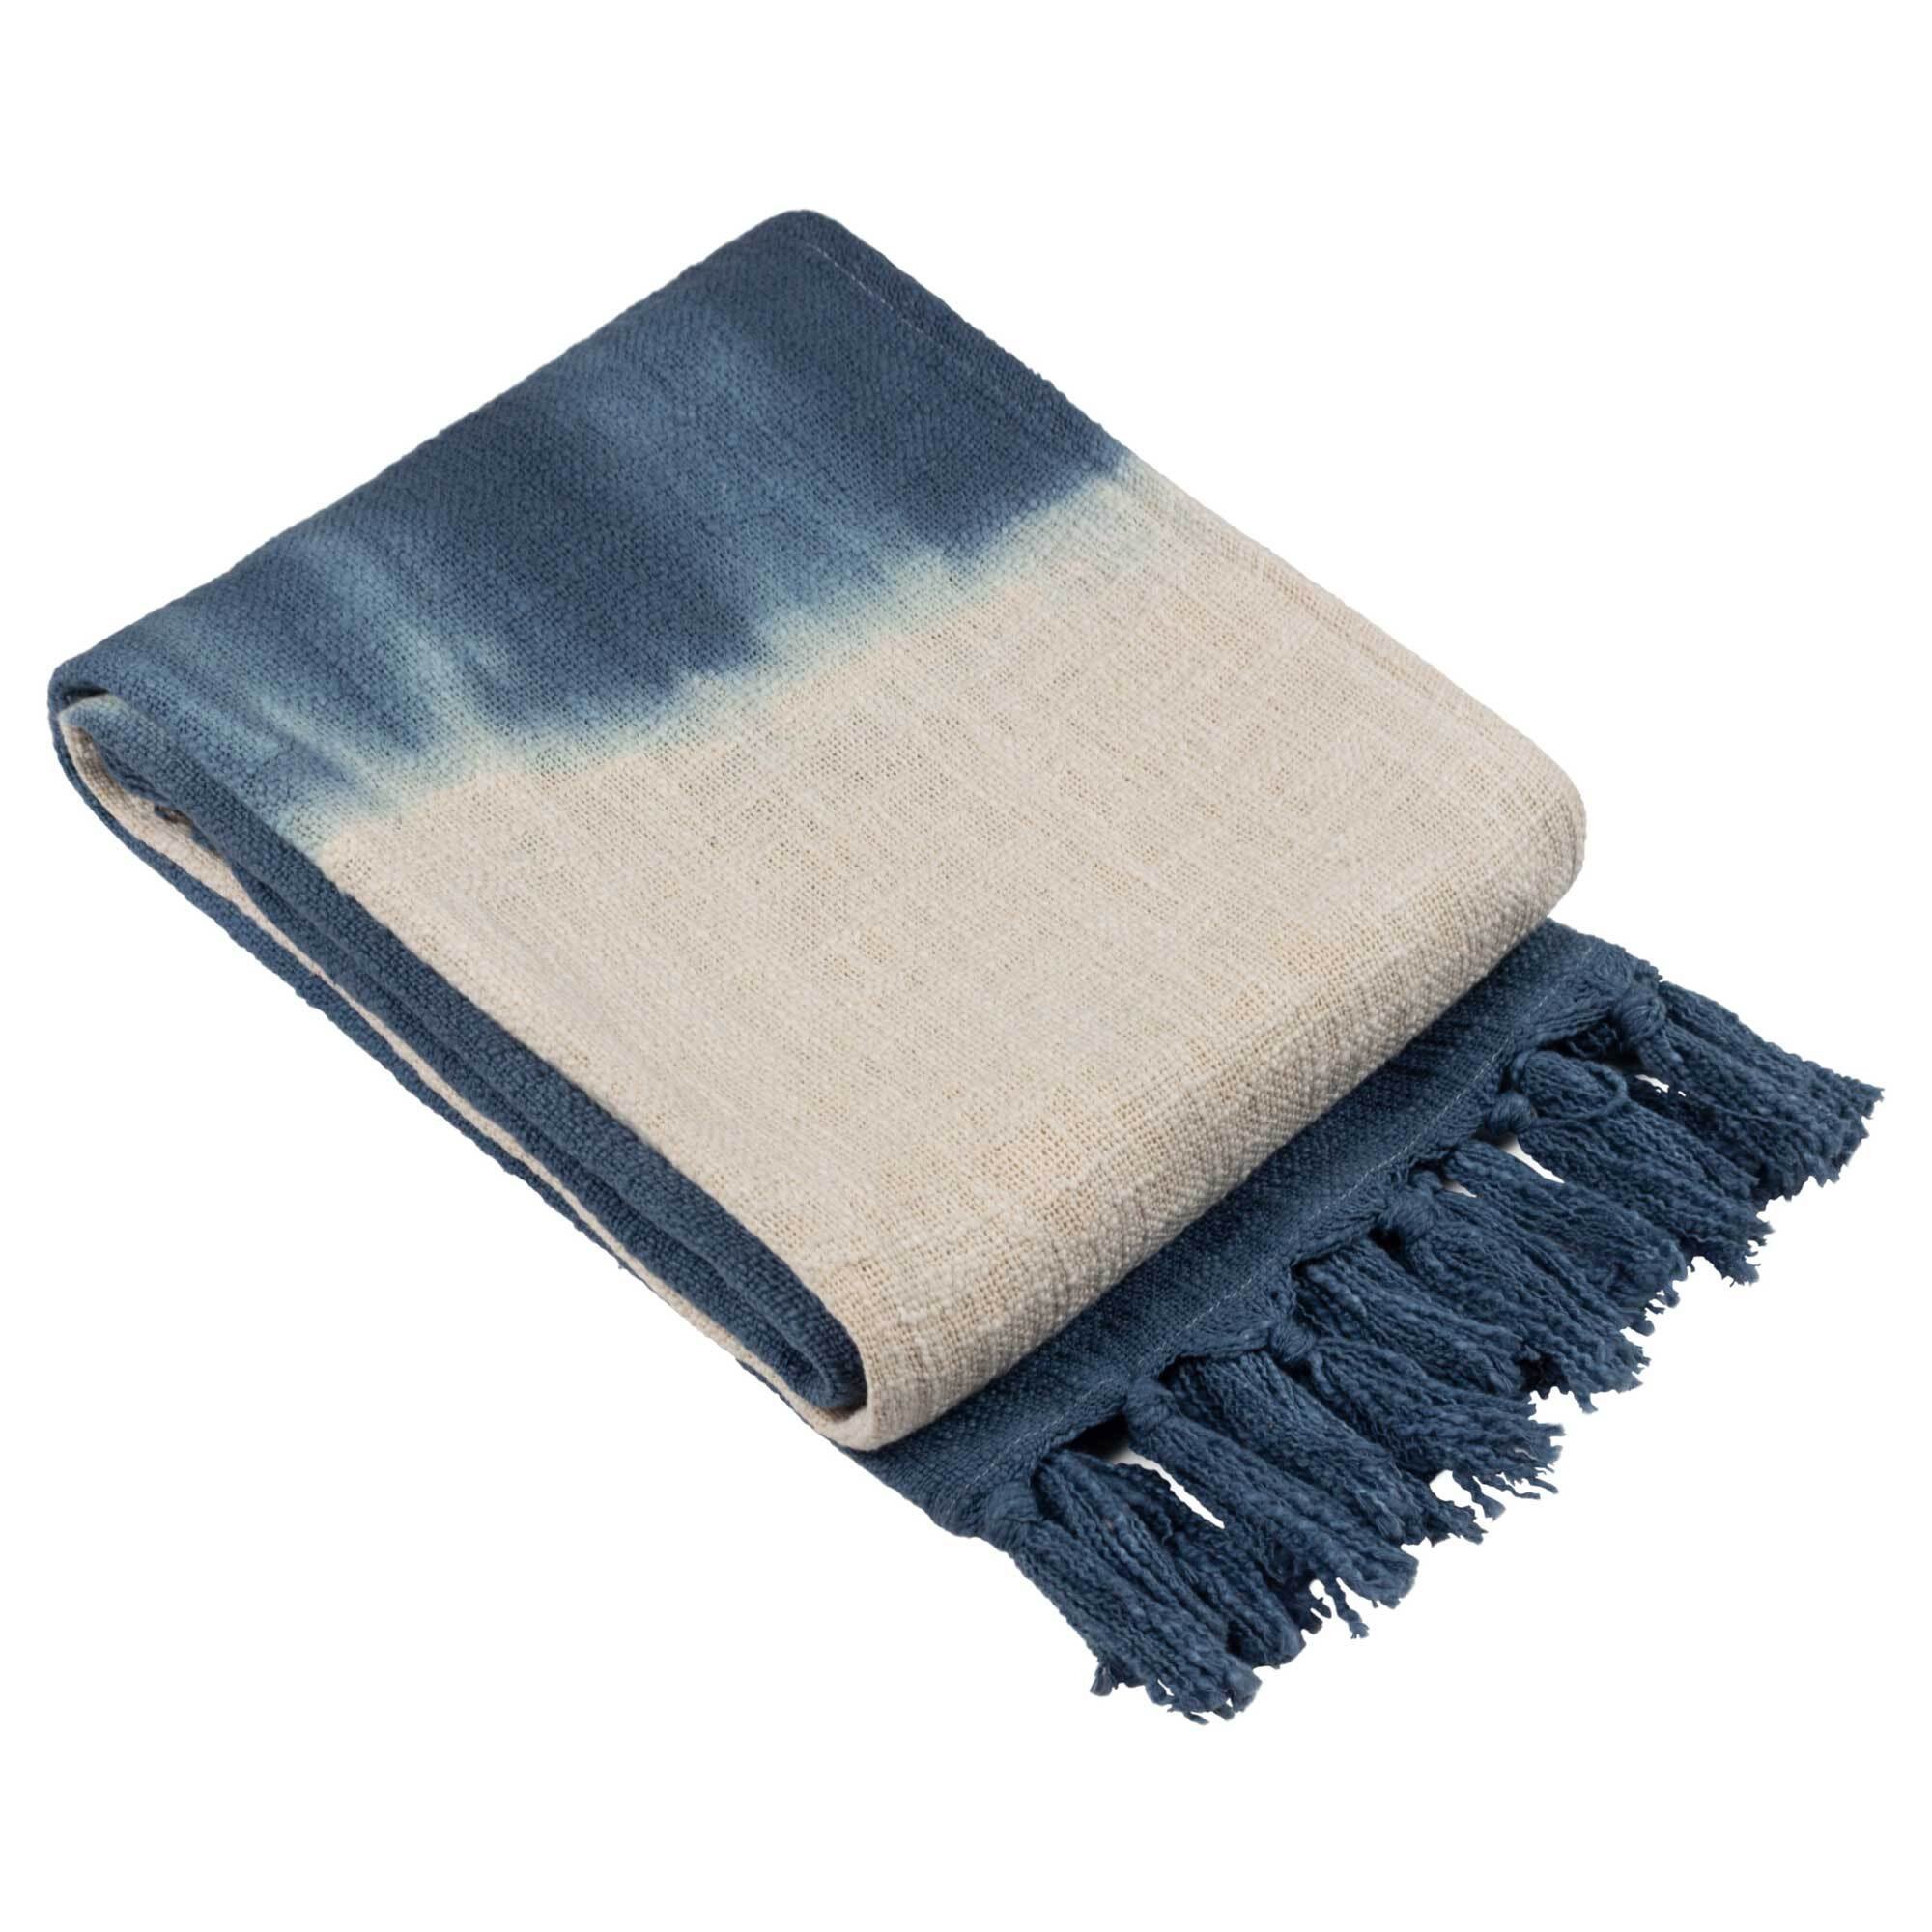 Blue Ombre Throw Blanket 100% Cotton - Barker & Stonehouse - image 1